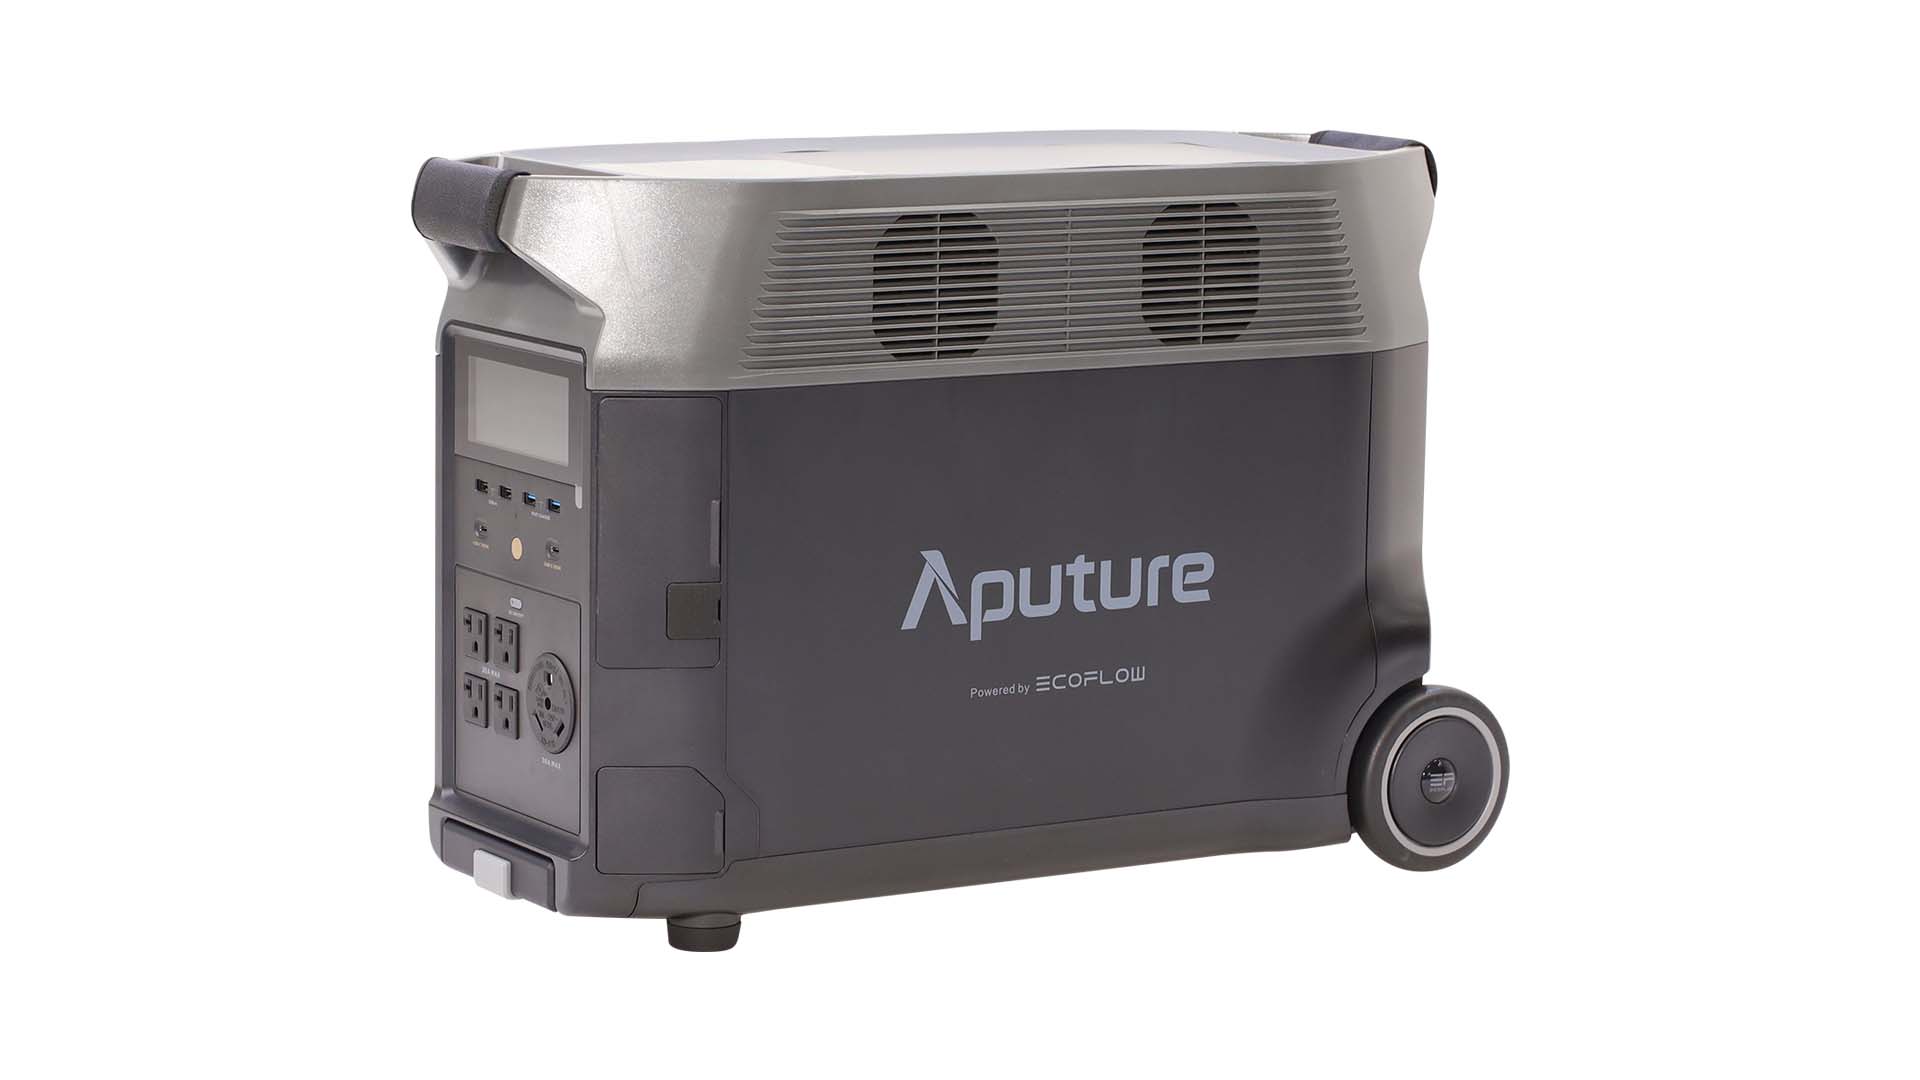 Aputure DELTA Pro (Powered by EcoFlow) Announced - A 3.600Wh Portable  Battery Power Solution